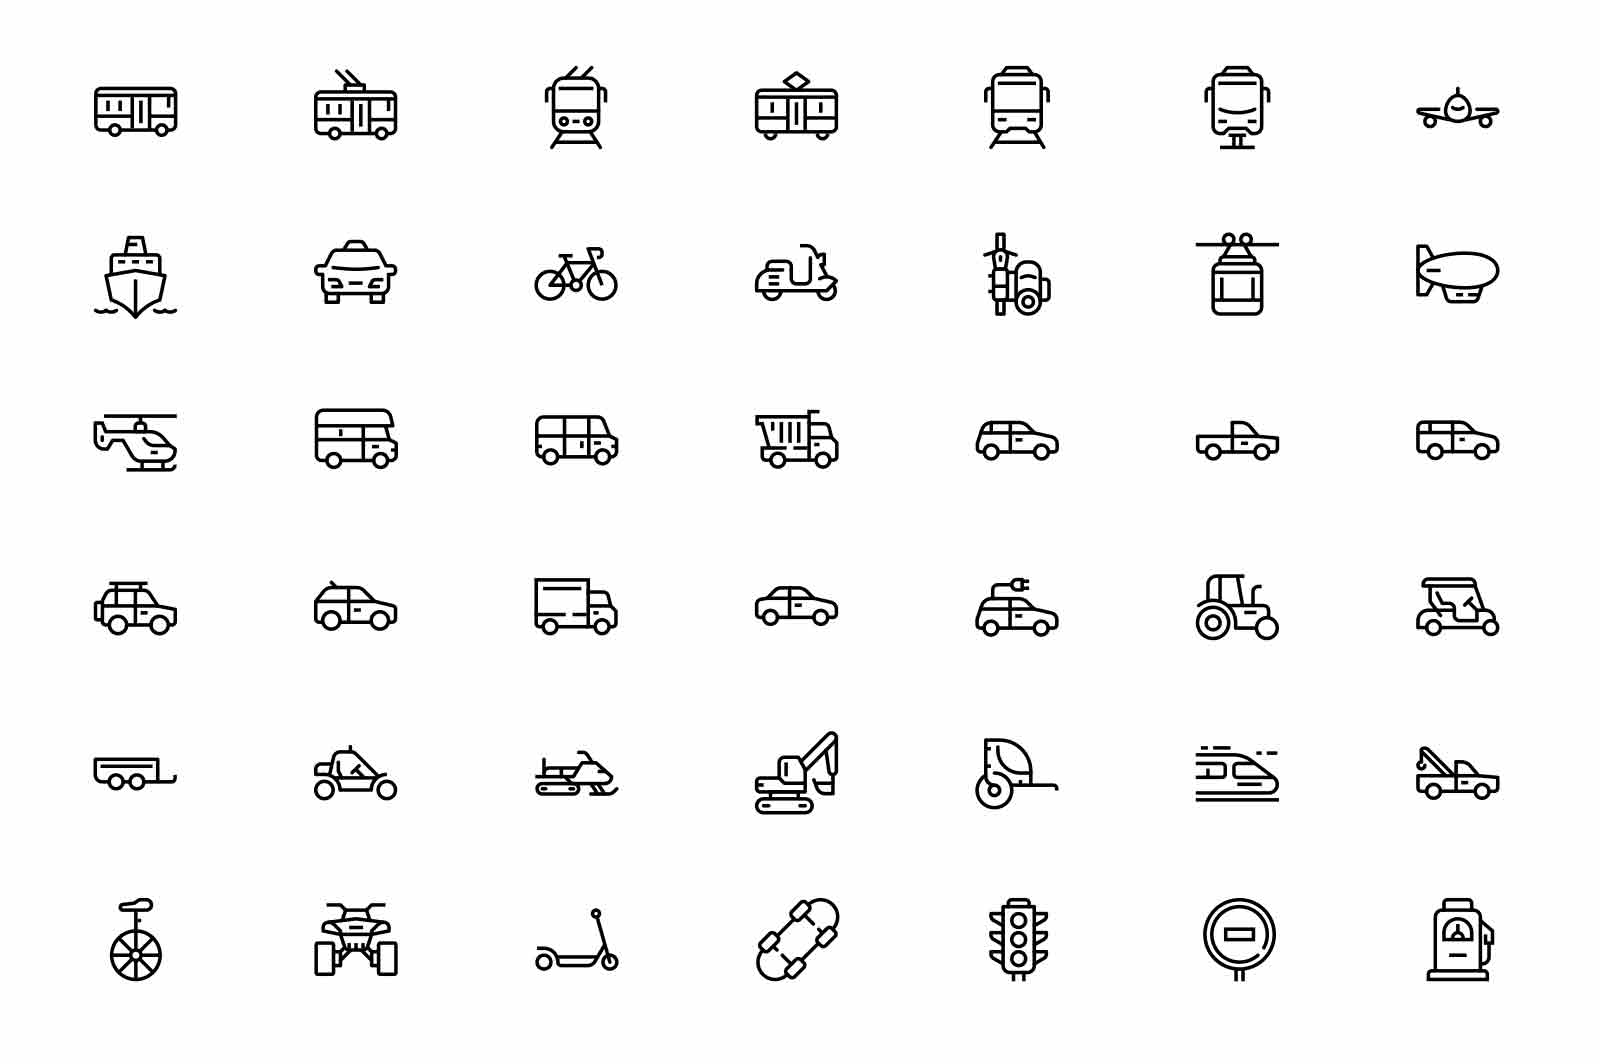 Cars and city transport icons set vector illustration. Airplane, bus, train, car, boat, tram line icon. Transportation and traffic concept